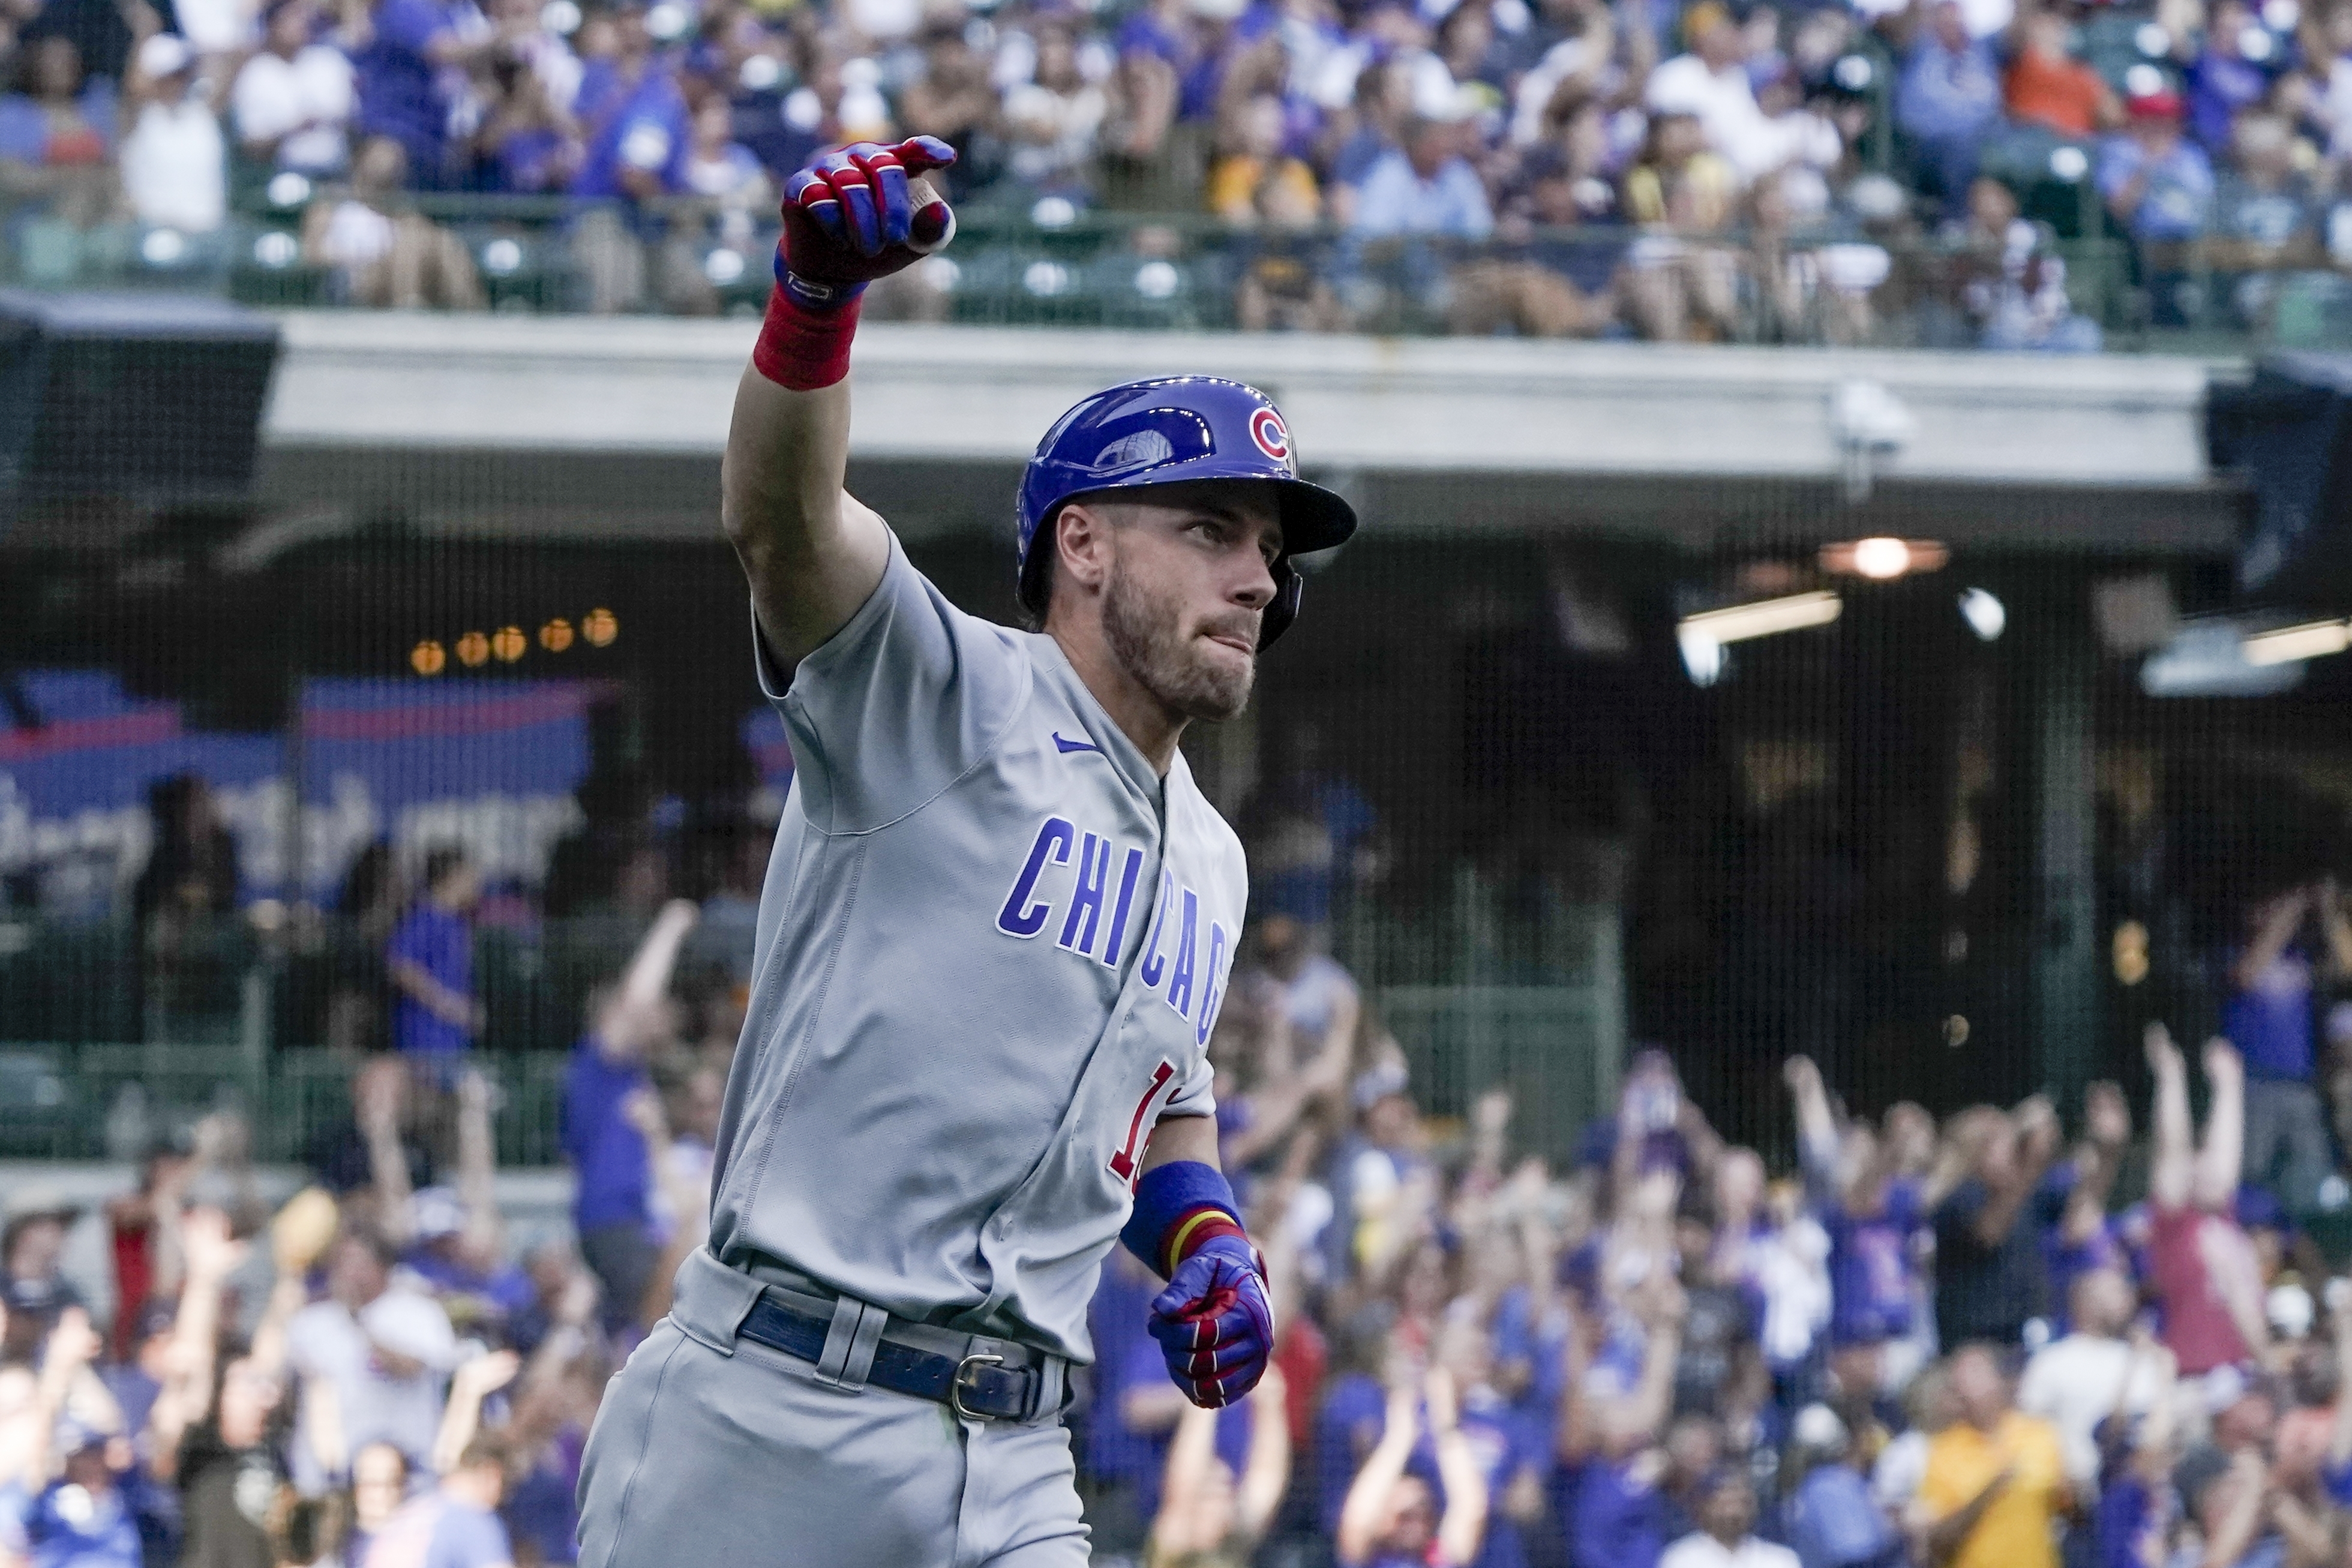 Cubs earn victory with unusual ending